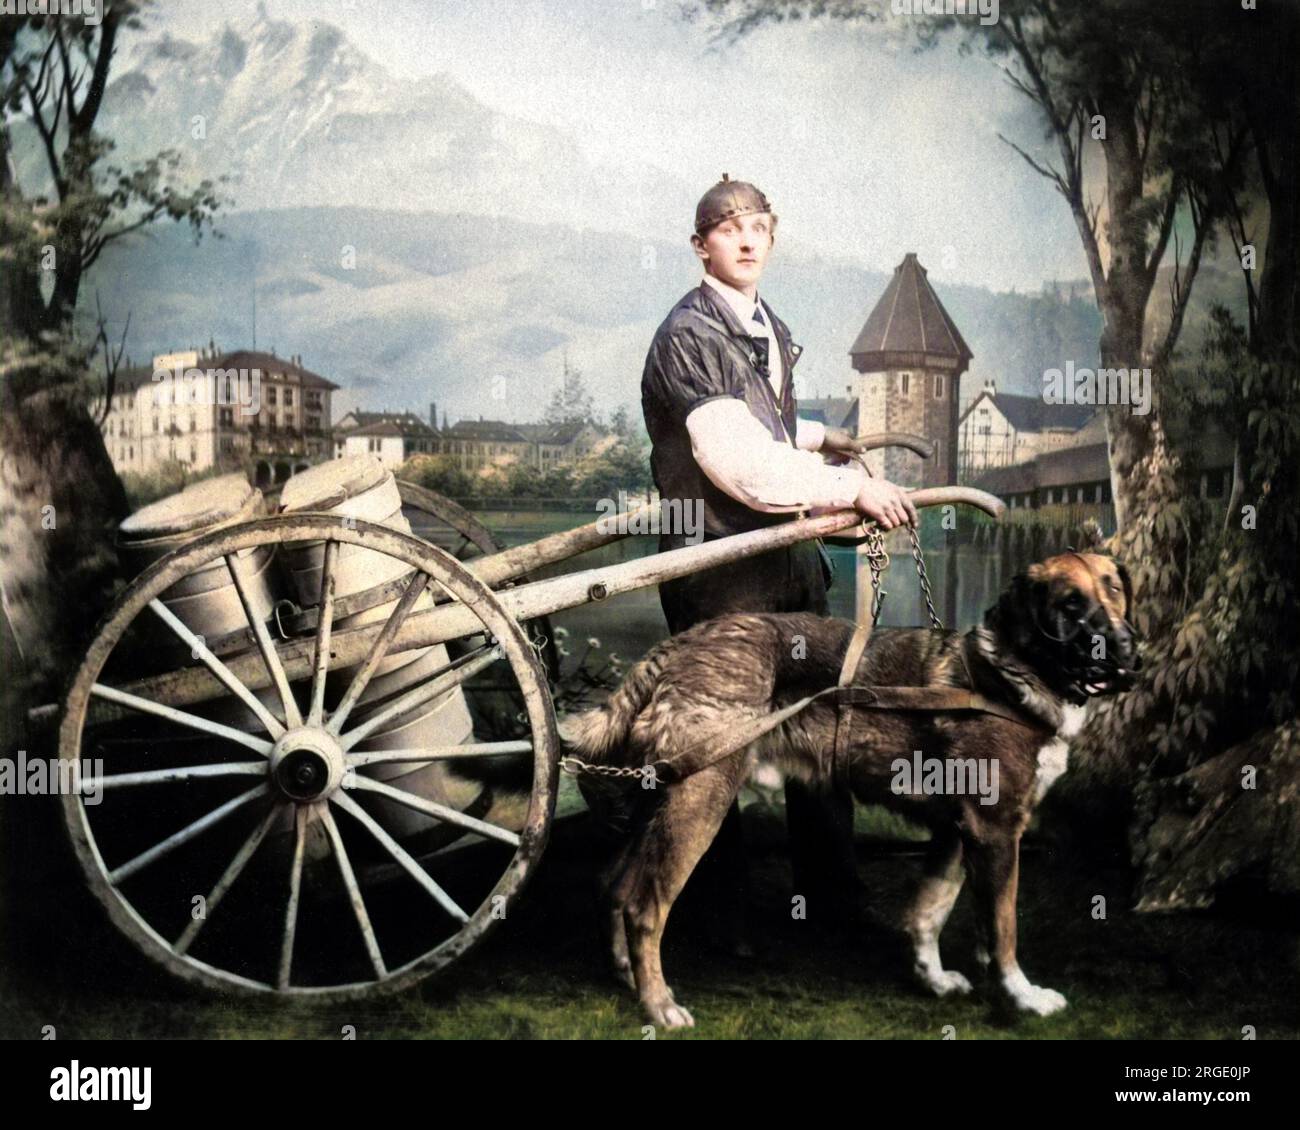 Man (possibly Belgian) and dog with a milk cart, in a studio photo with a painted backdrop. Stock Photo